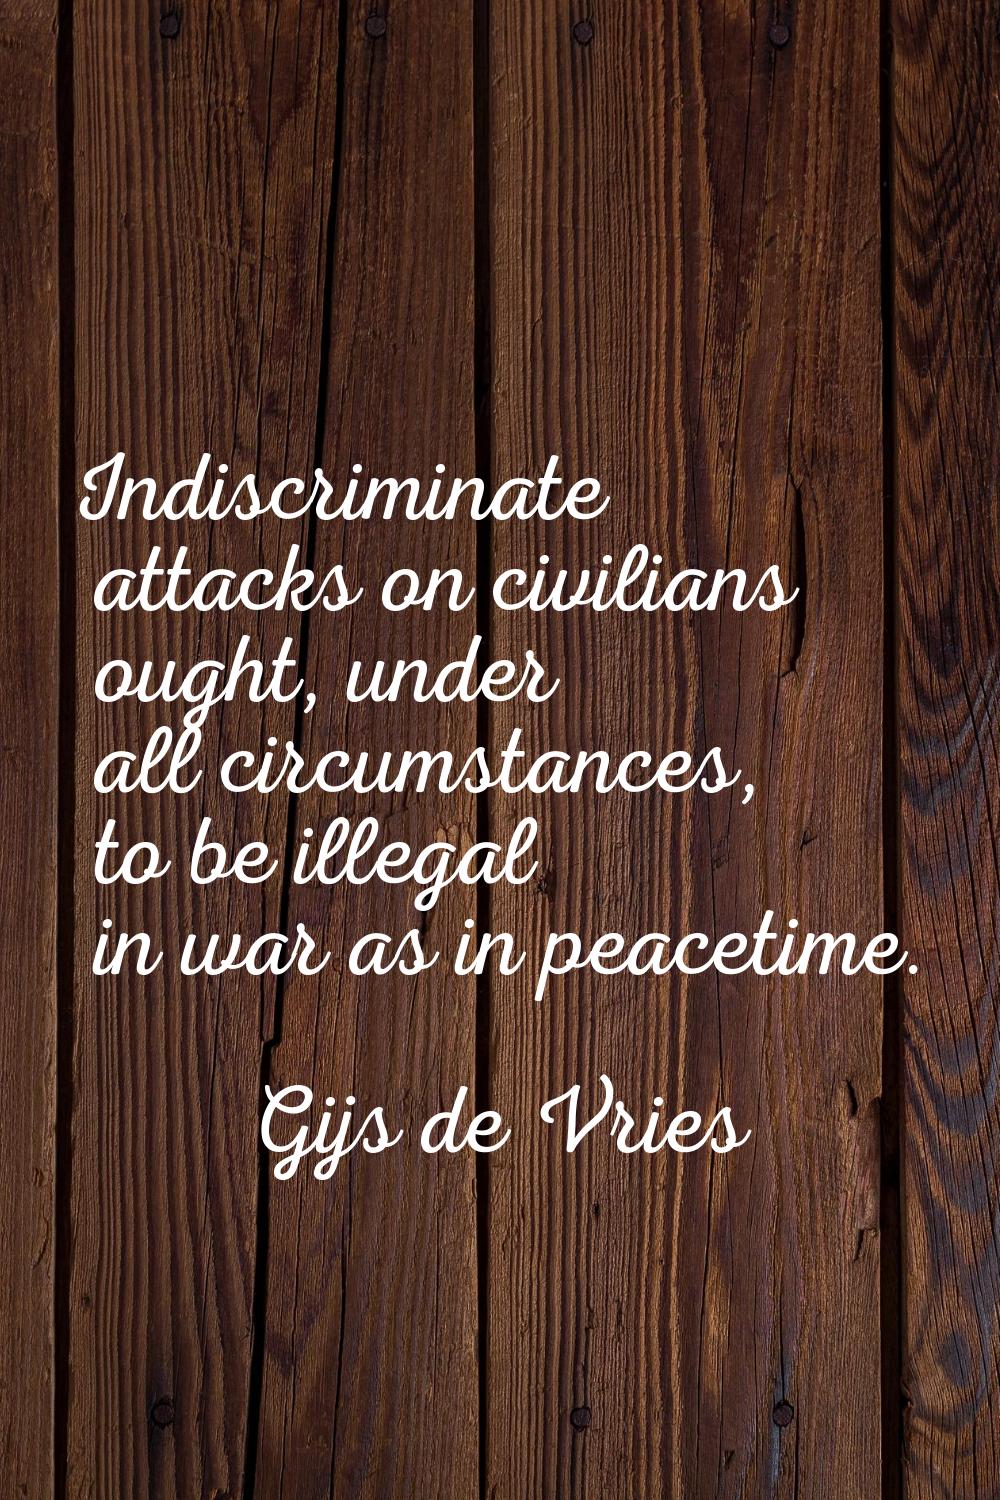 Indiscriminate attacks on civilians ought, under all circumstances, to be illegal in war as in peac